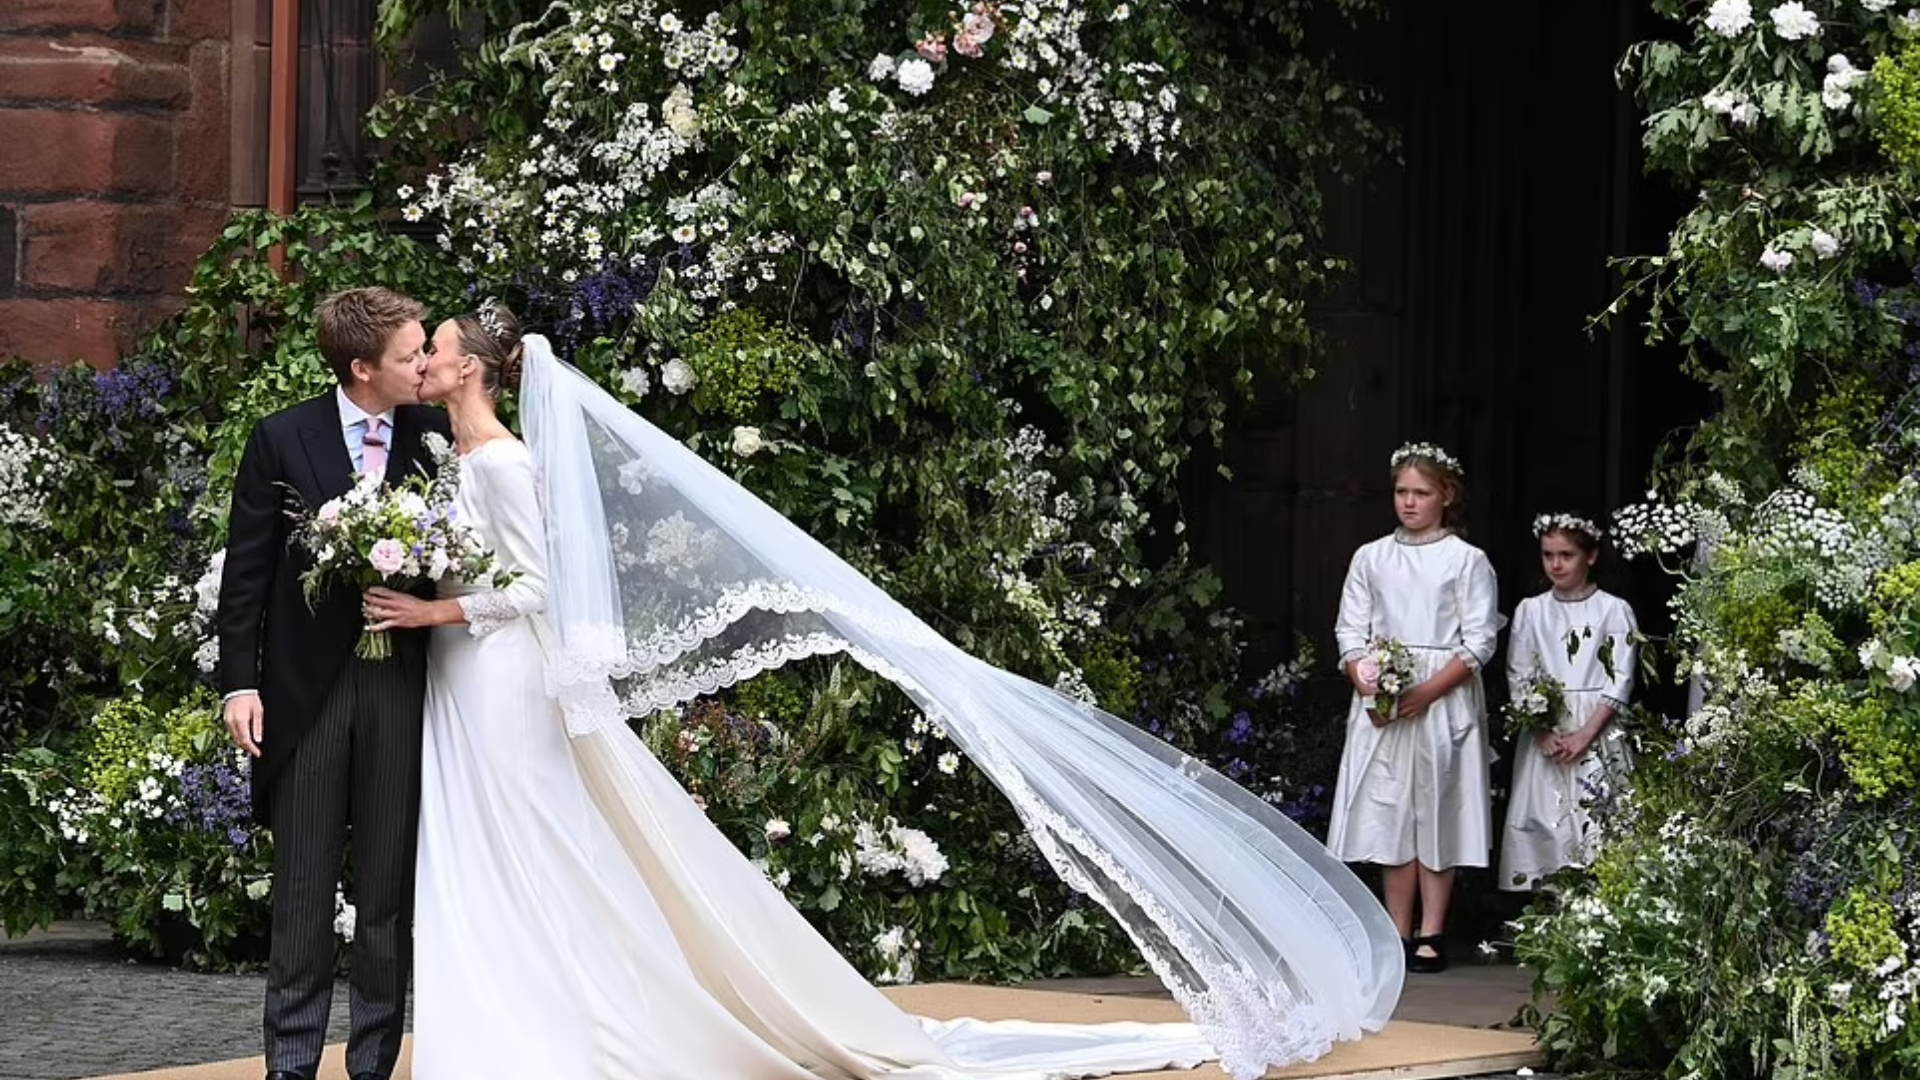 Wedding Of The Duke of Westminster And Olivia Henson: A Sneak- Peek Into Her Stunning Attire And Prince George's Absence